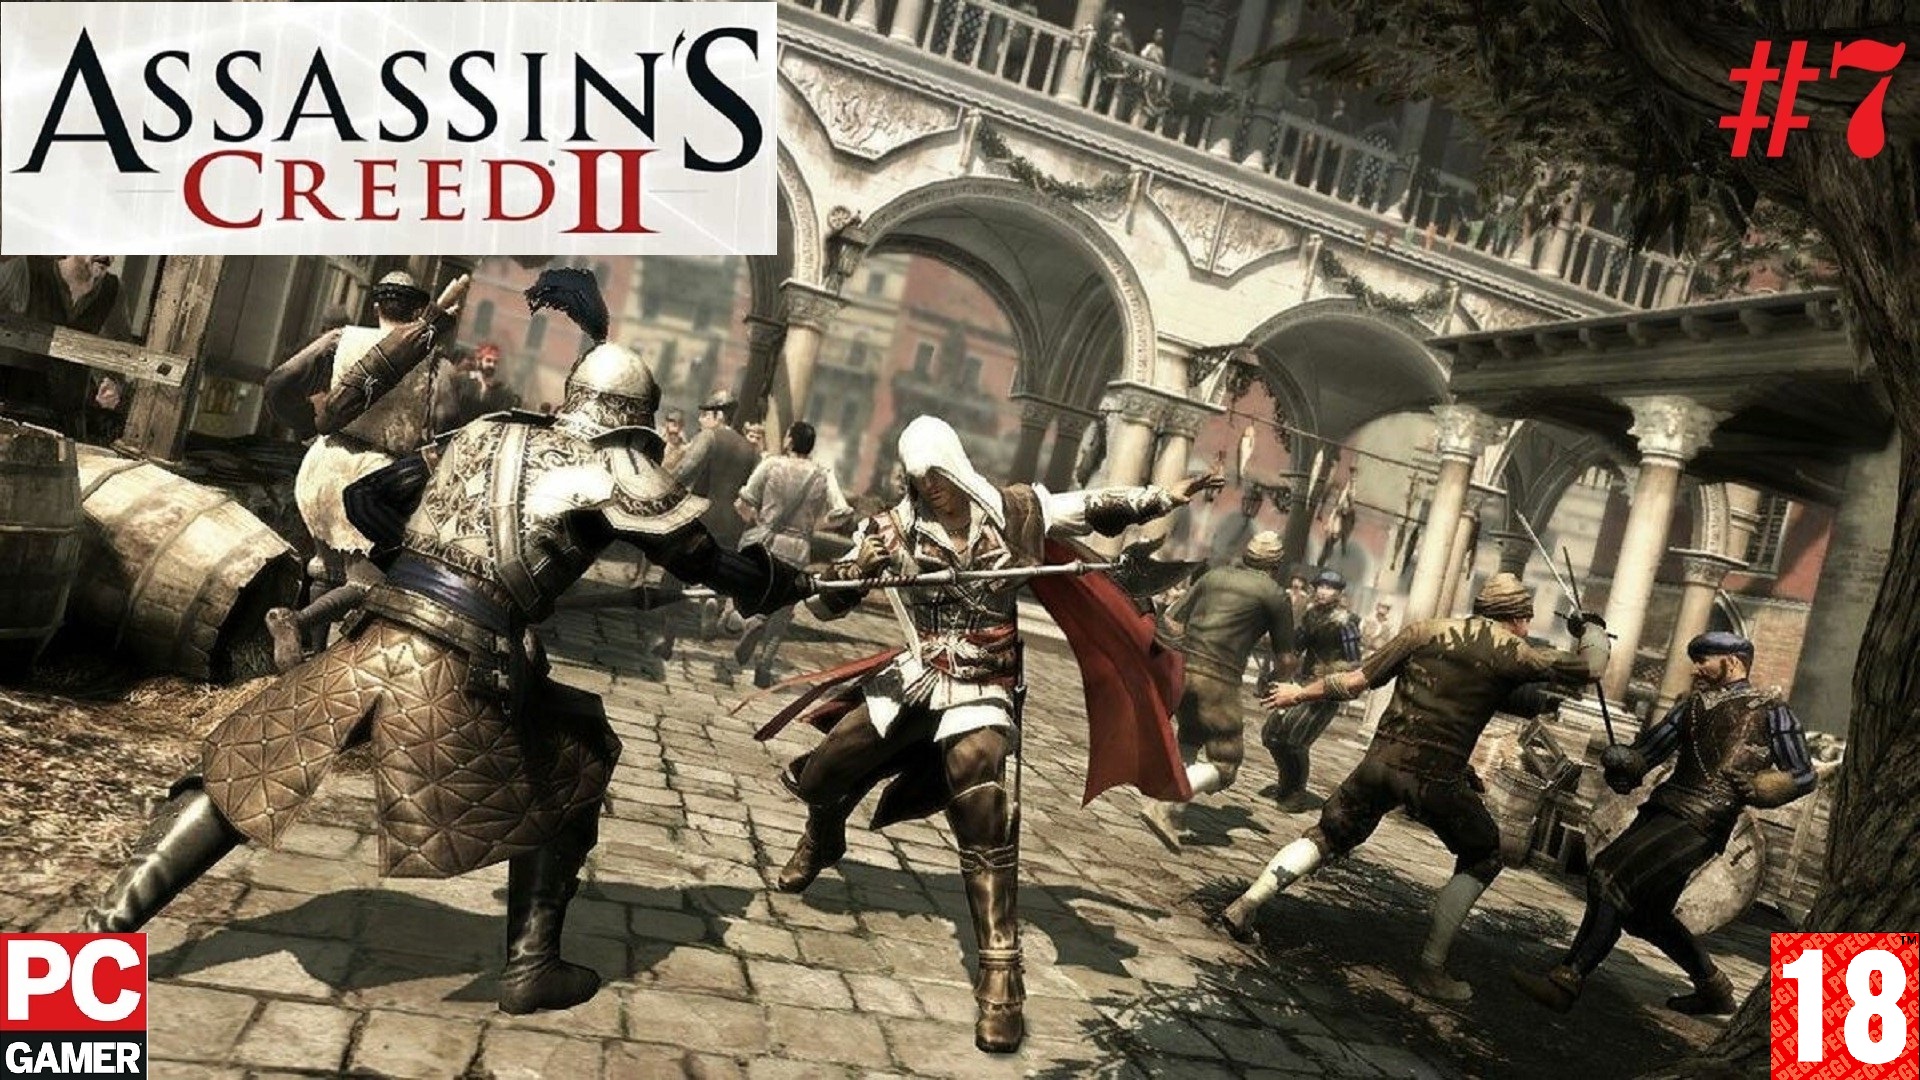 Assassin games 2. Ассасин Крид 2. Assassins Creed 2 [ps3]. Assassin's Creed 2 ps3 Скриншоты. Assassin’s Creed II – 2009.